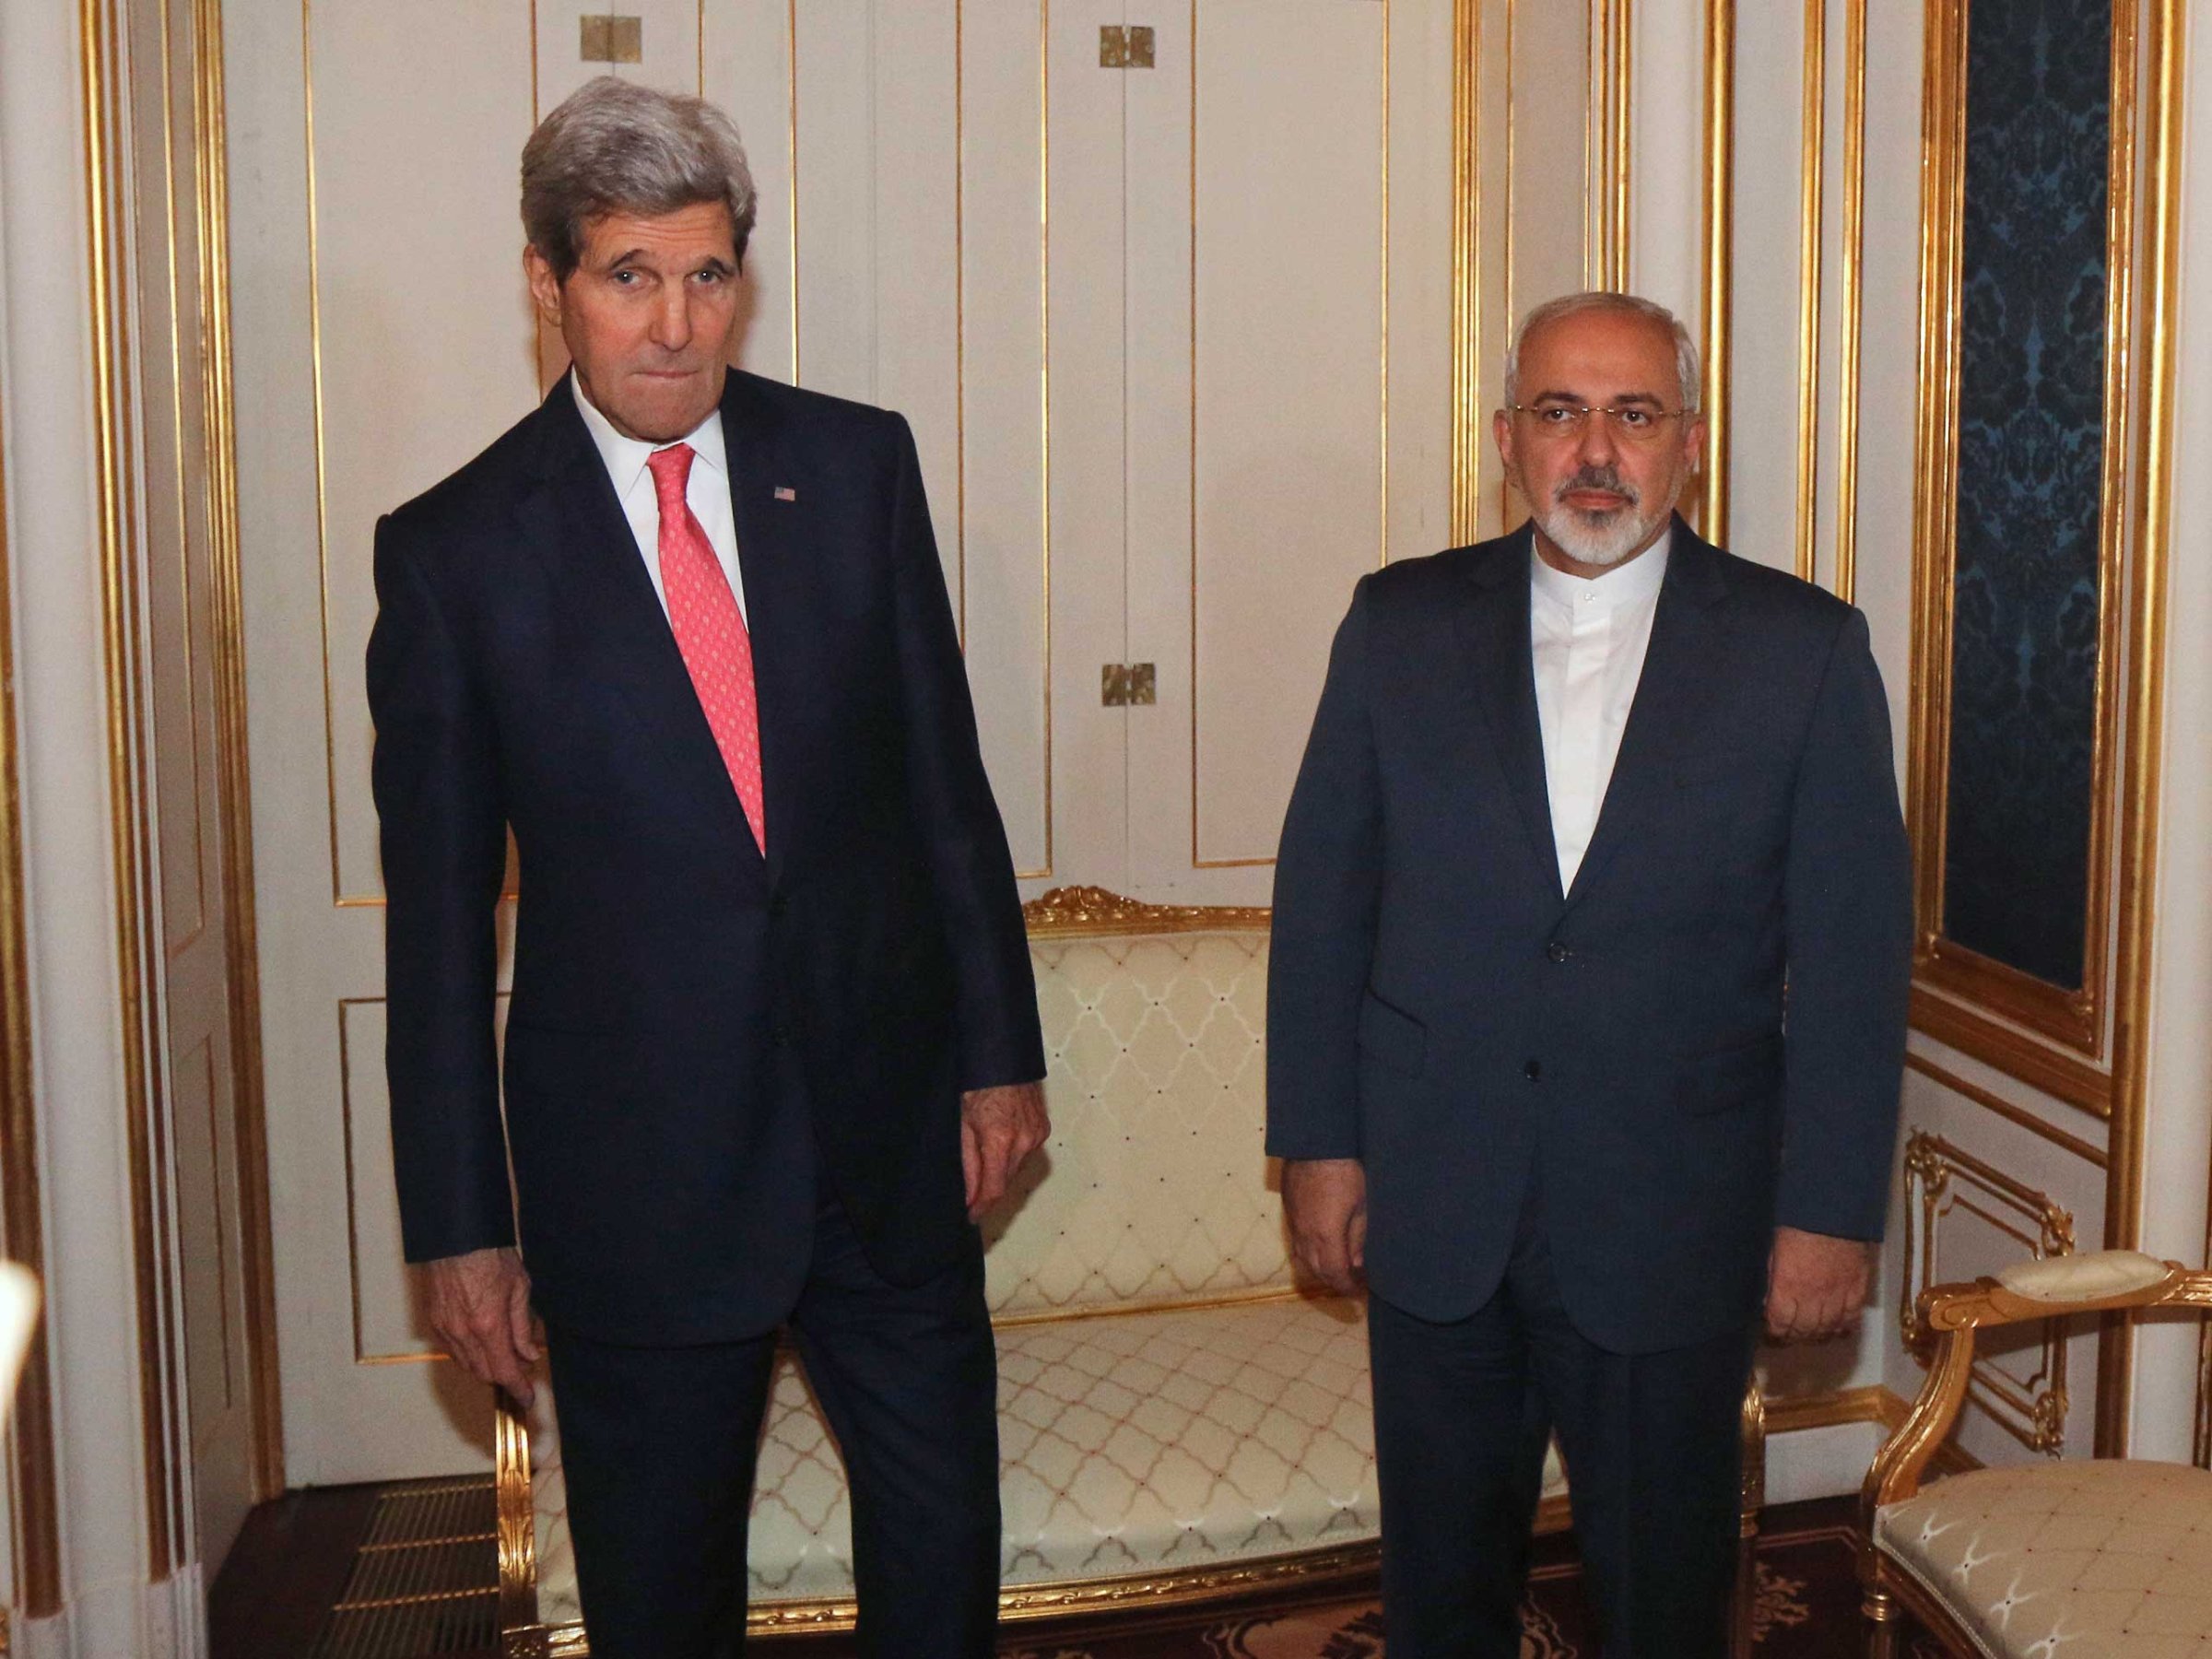 Secretary of State John Kerry and Iranian Foreign Minister Javad Zarif before a meeting in Vienna, Nov. 23, 2014.